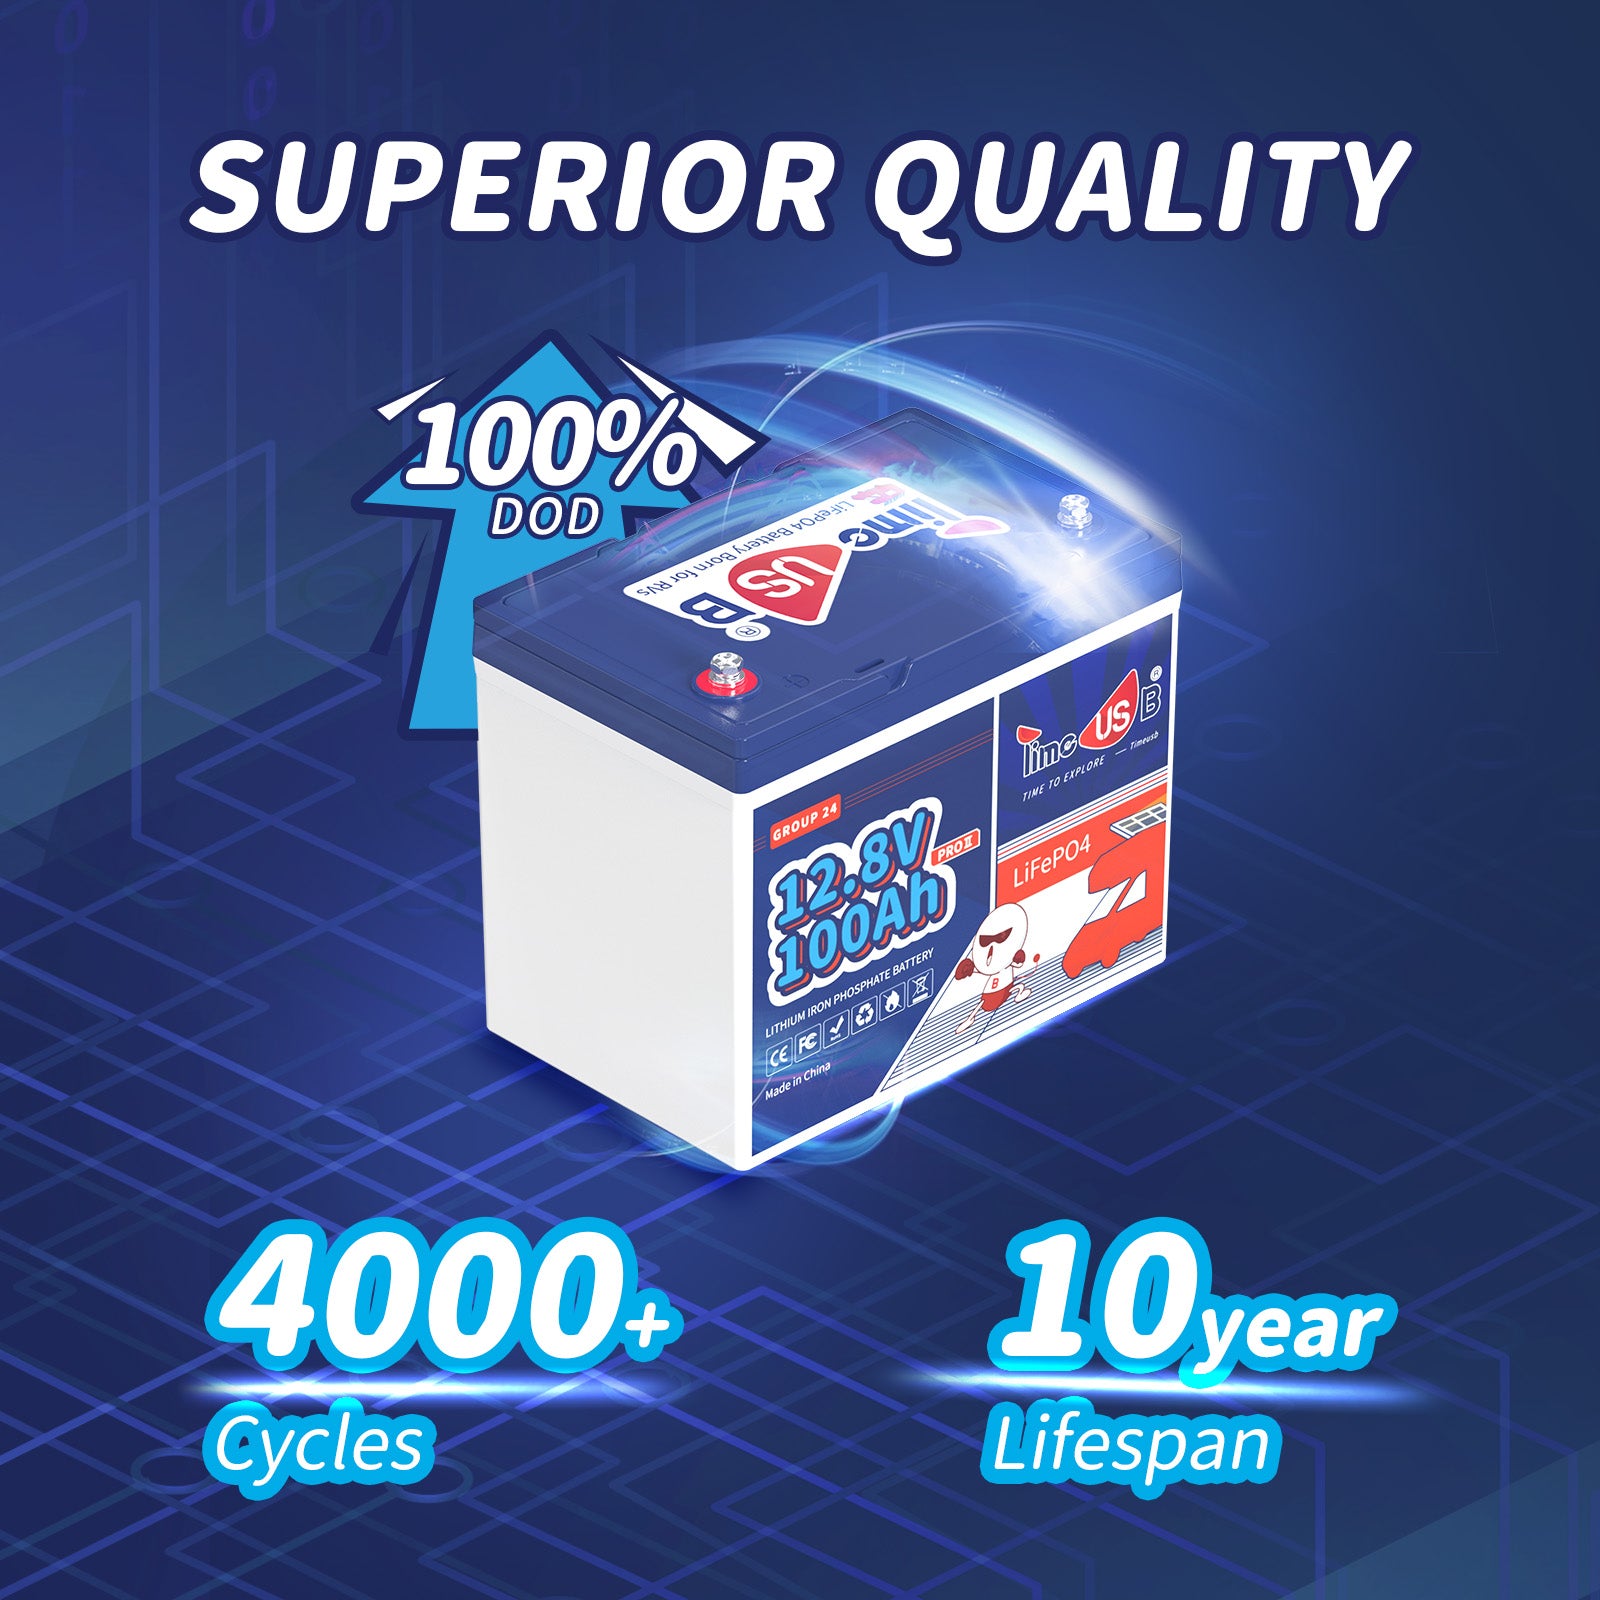 Timeusb 12V 100Ah Group24 Ultra-compact size LiFePO4 Battery